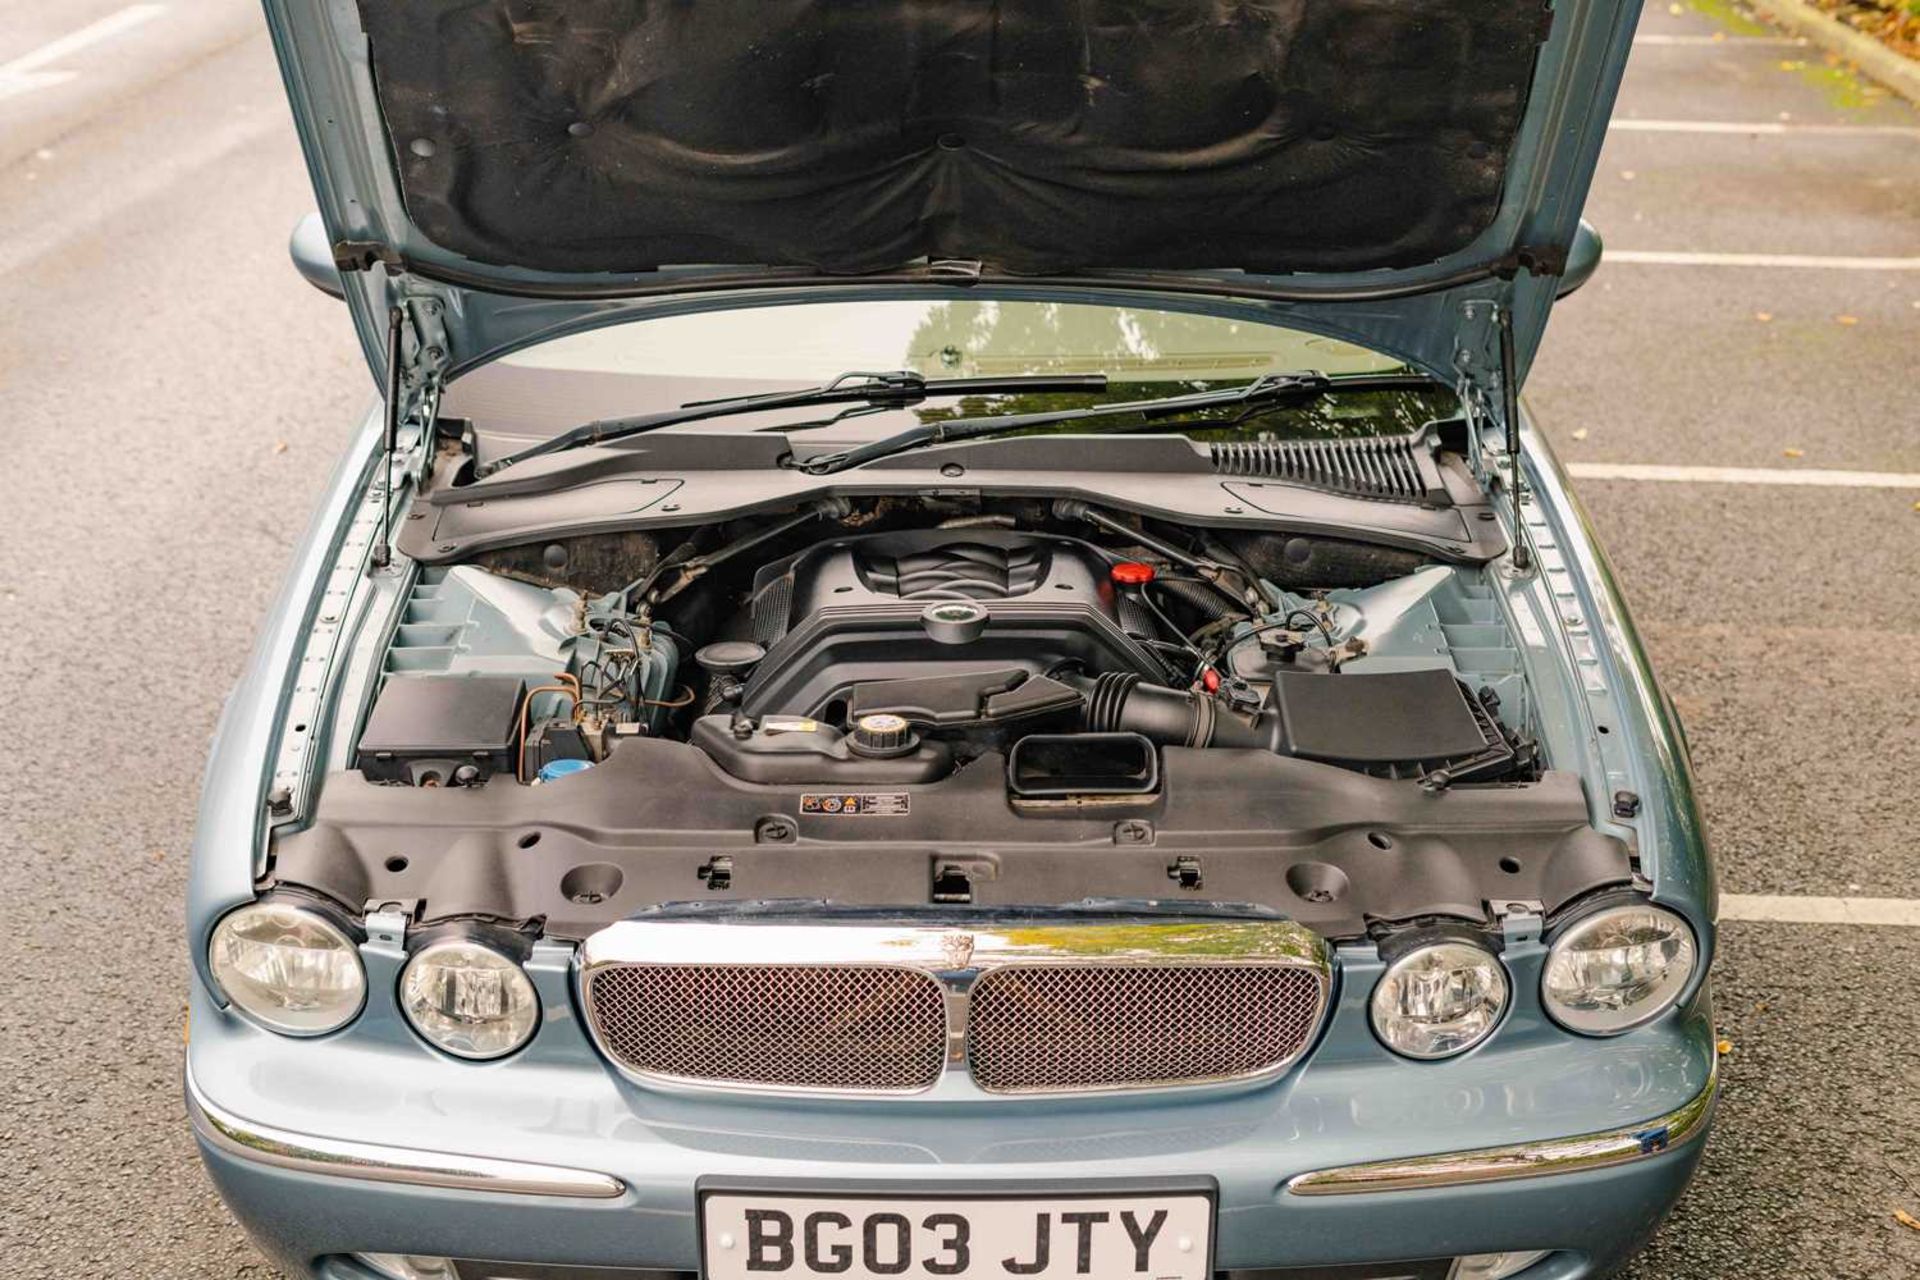 2003 Jaguar XJ8 4.2 V8 SE Range-topping 'Special Equipment' model, with a current MOT and warranted  - Image 59 of 124